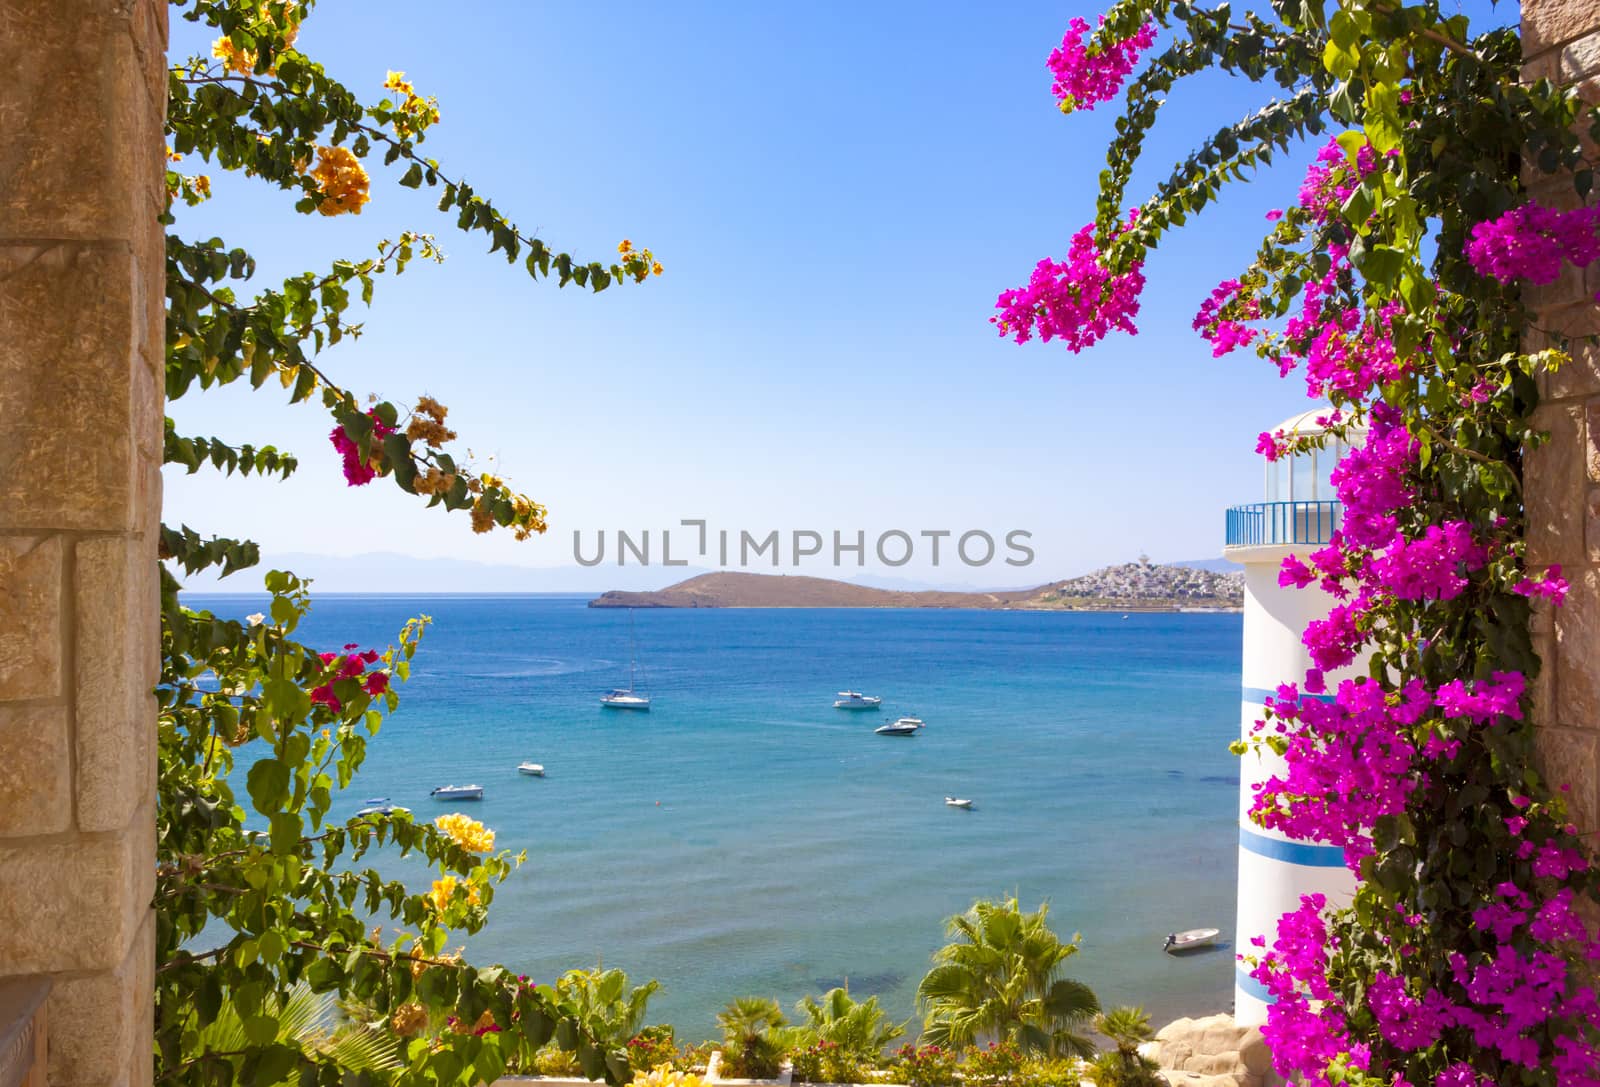 Beautiful flowers can be seen past the Lighthouse at Ortakent in Turkey with blue/green seas stretching to the horizon.